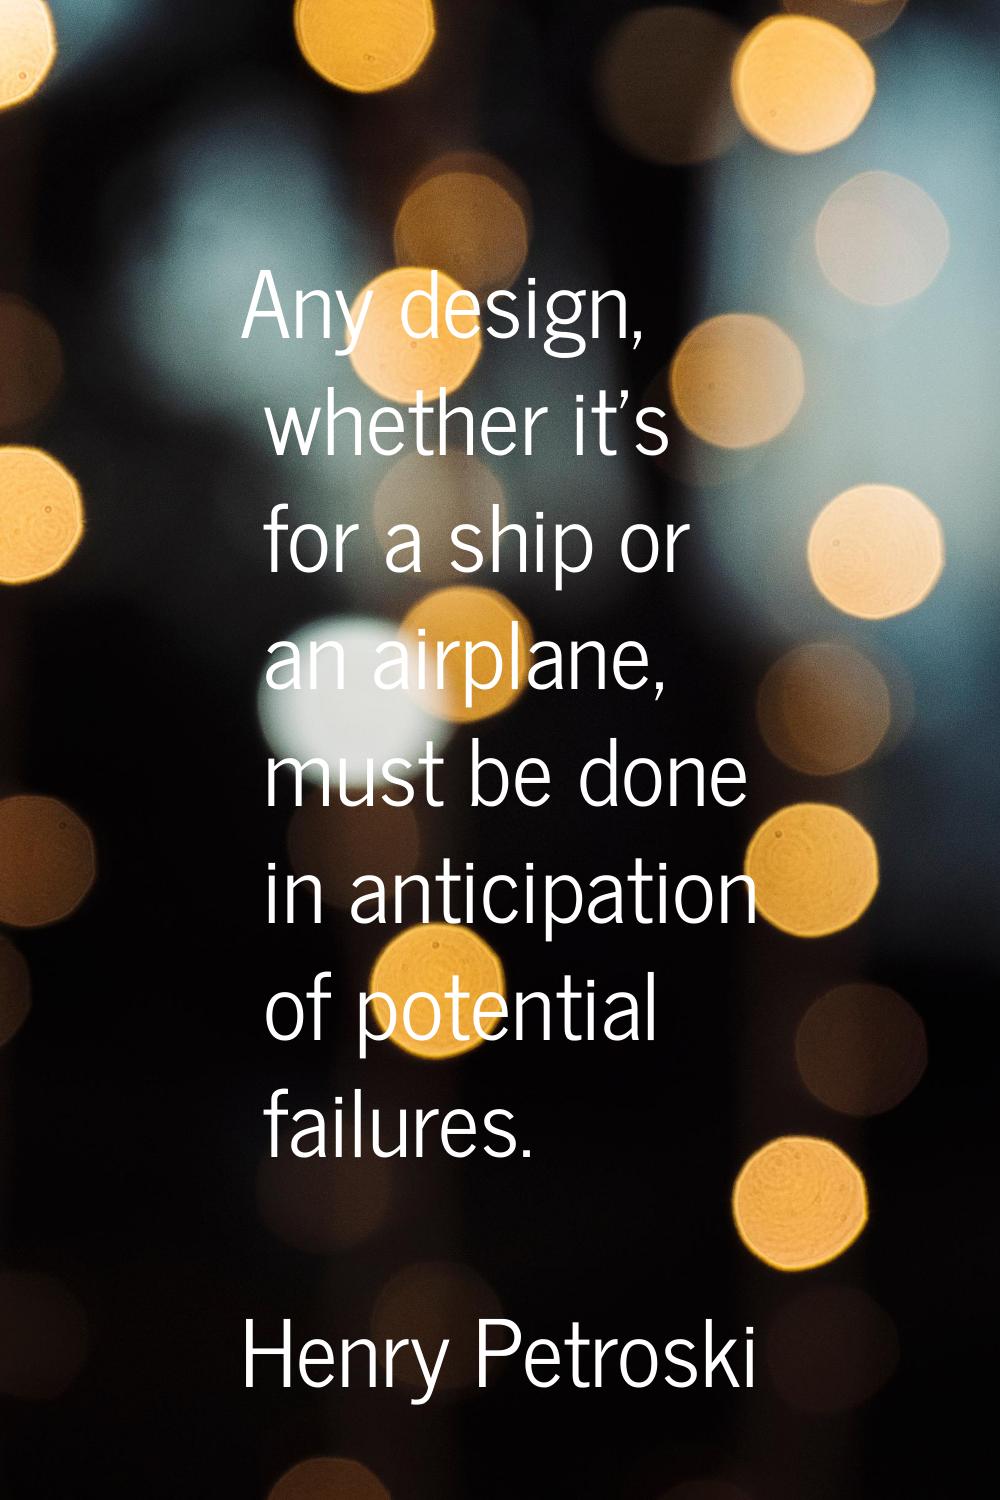 Any design, whether it's for a ship or an airplane, must be done in anticipation of potential failu